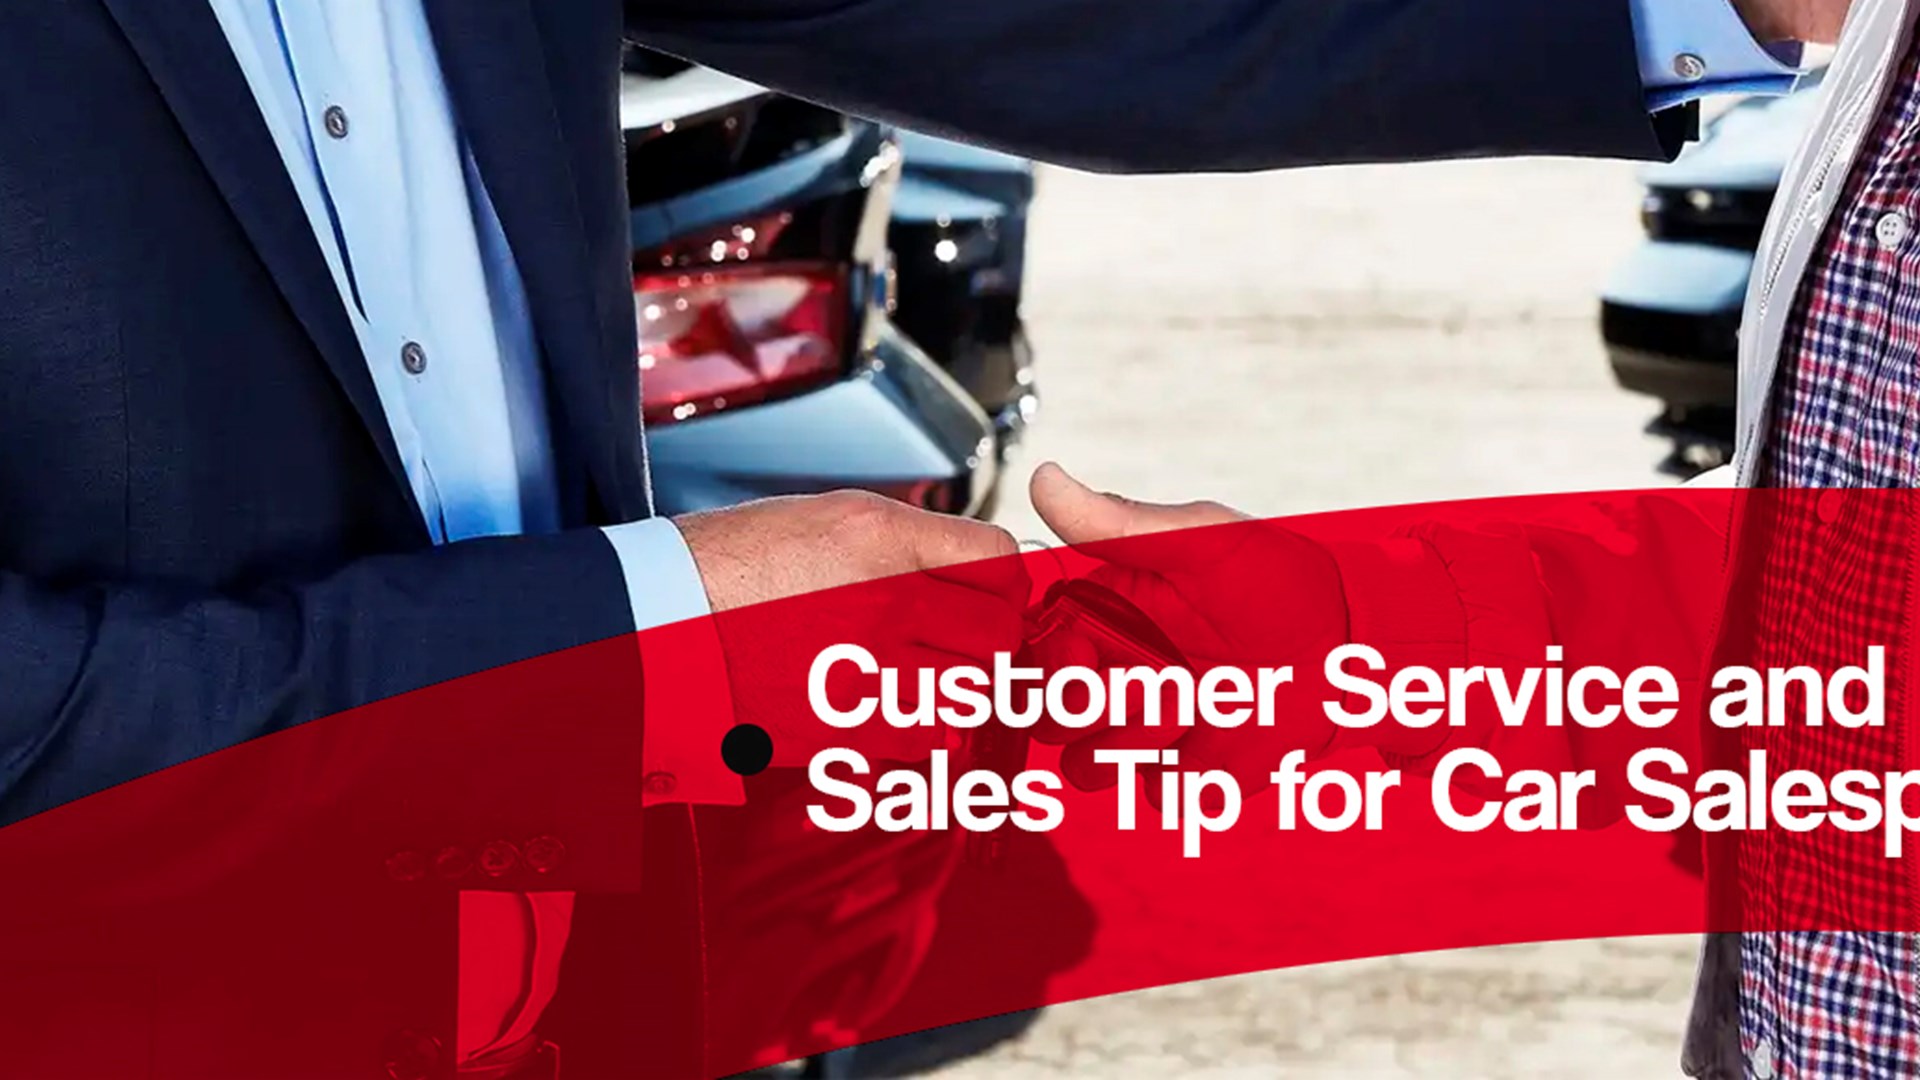 Customer service tips for automotive sales people